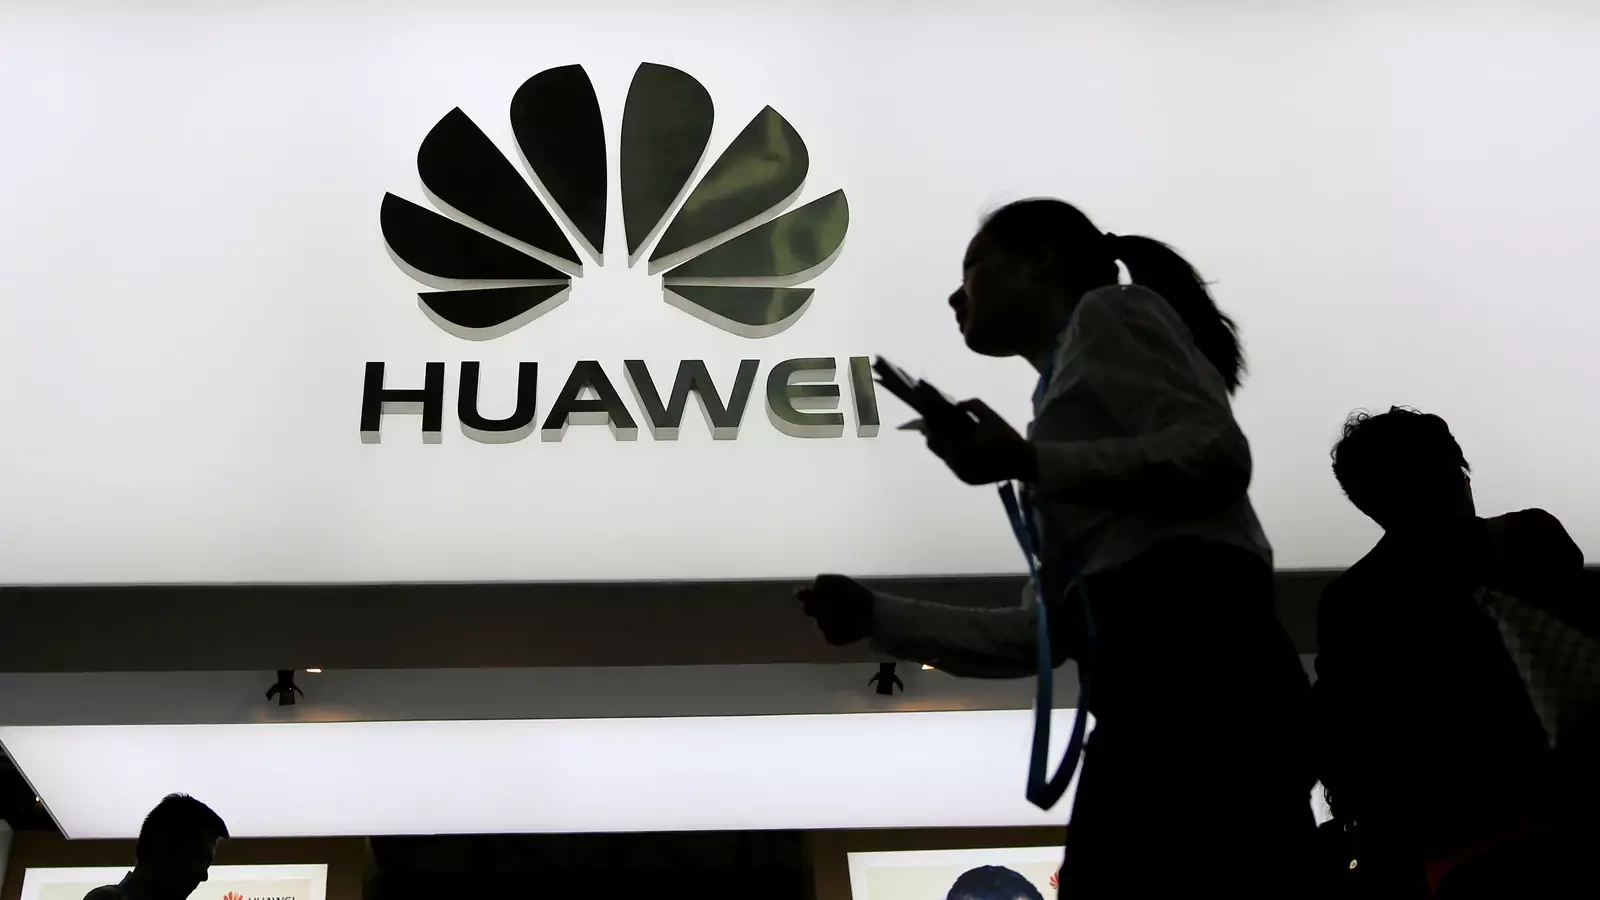 People walk past a sign board of Huawei at CES (Consumer Electronics Show) Asia 2016 in Shanghai, China.